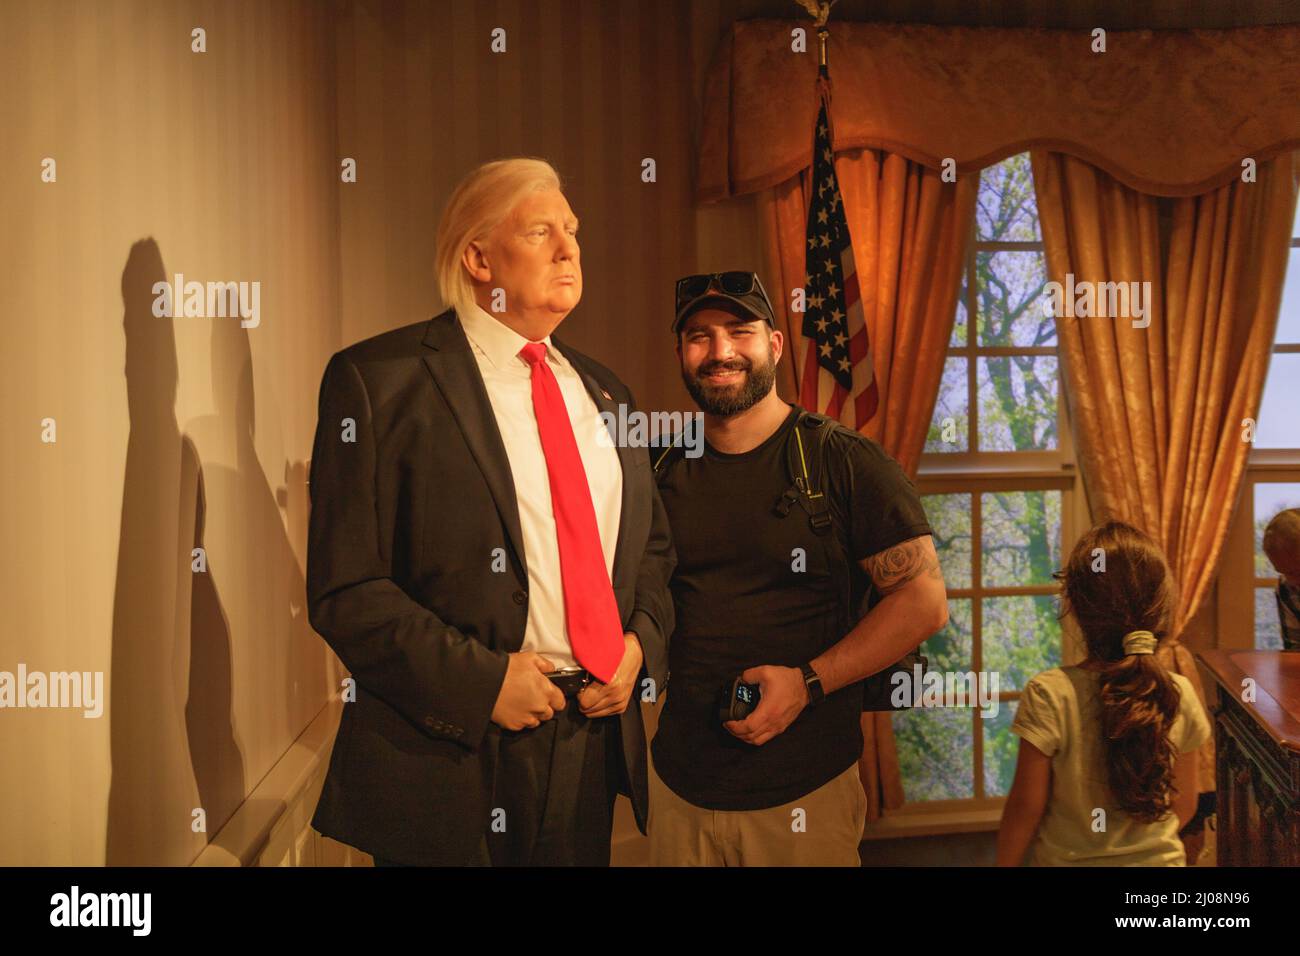 Tourist guy posing with Donal Trump wax figure in Madame Tussauds museum Stock Photo